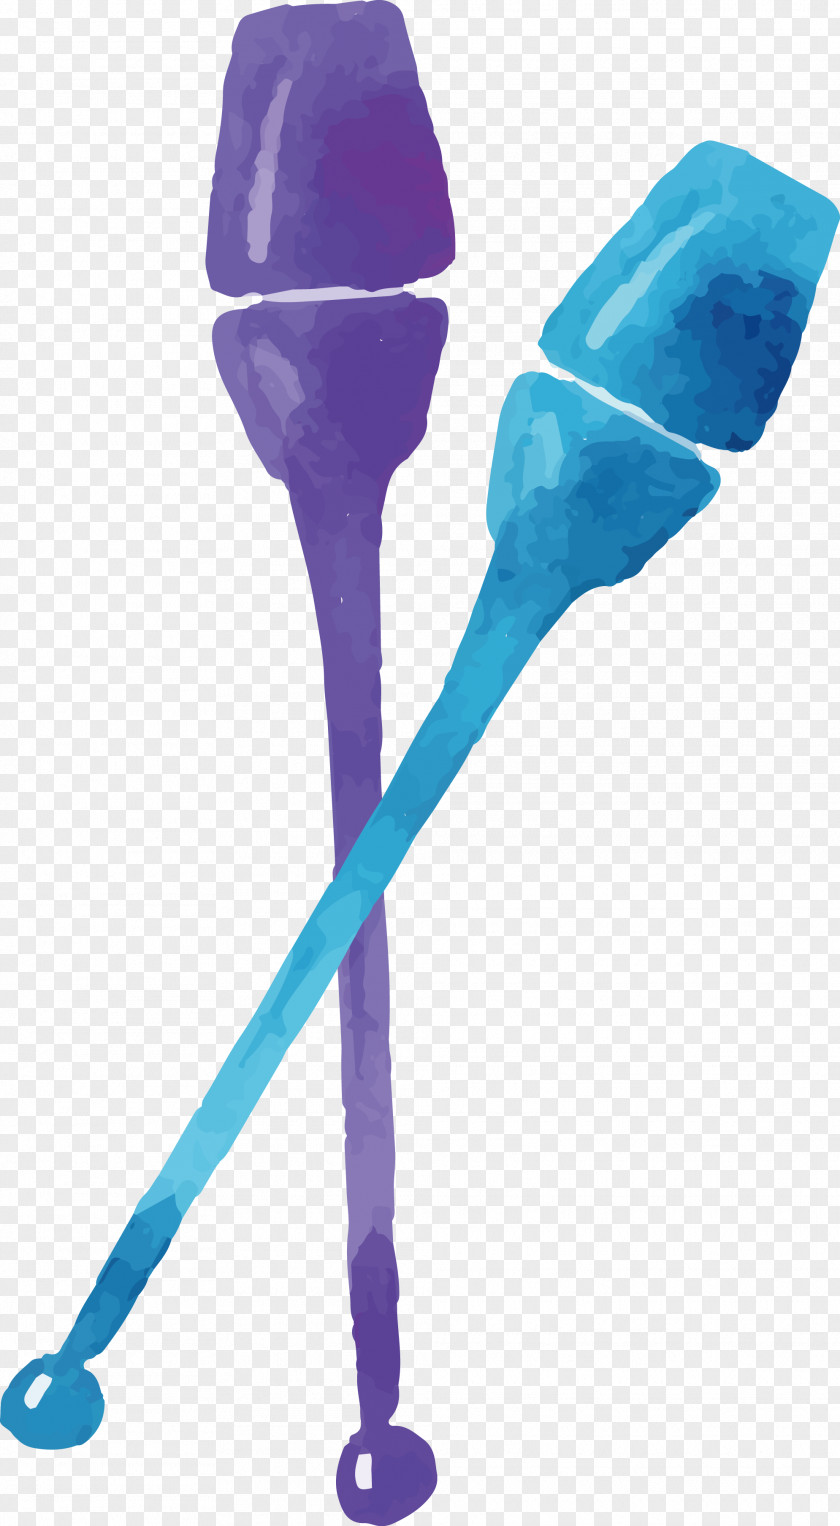 Drawing Vector Sand Hammer Watercolor Painting PNG